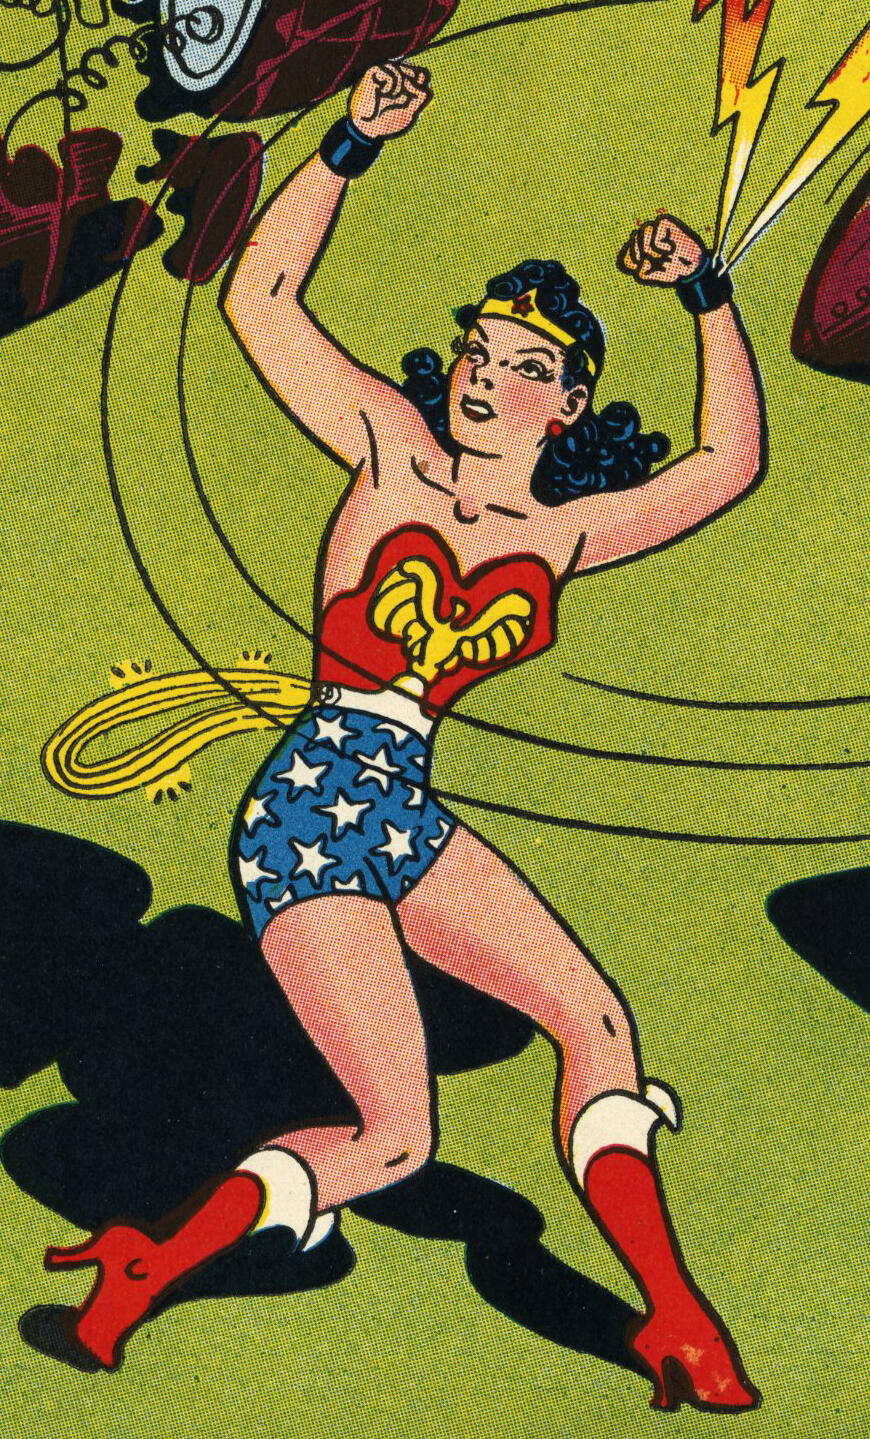 VCU Libraries' Special Collections and Archives has created a gallery of some of its Wonder Woman comics, art and related items. The gallery can be found at https://gallery.library.vcu.edu/
exhibits/show/wonderwoman/wwherself